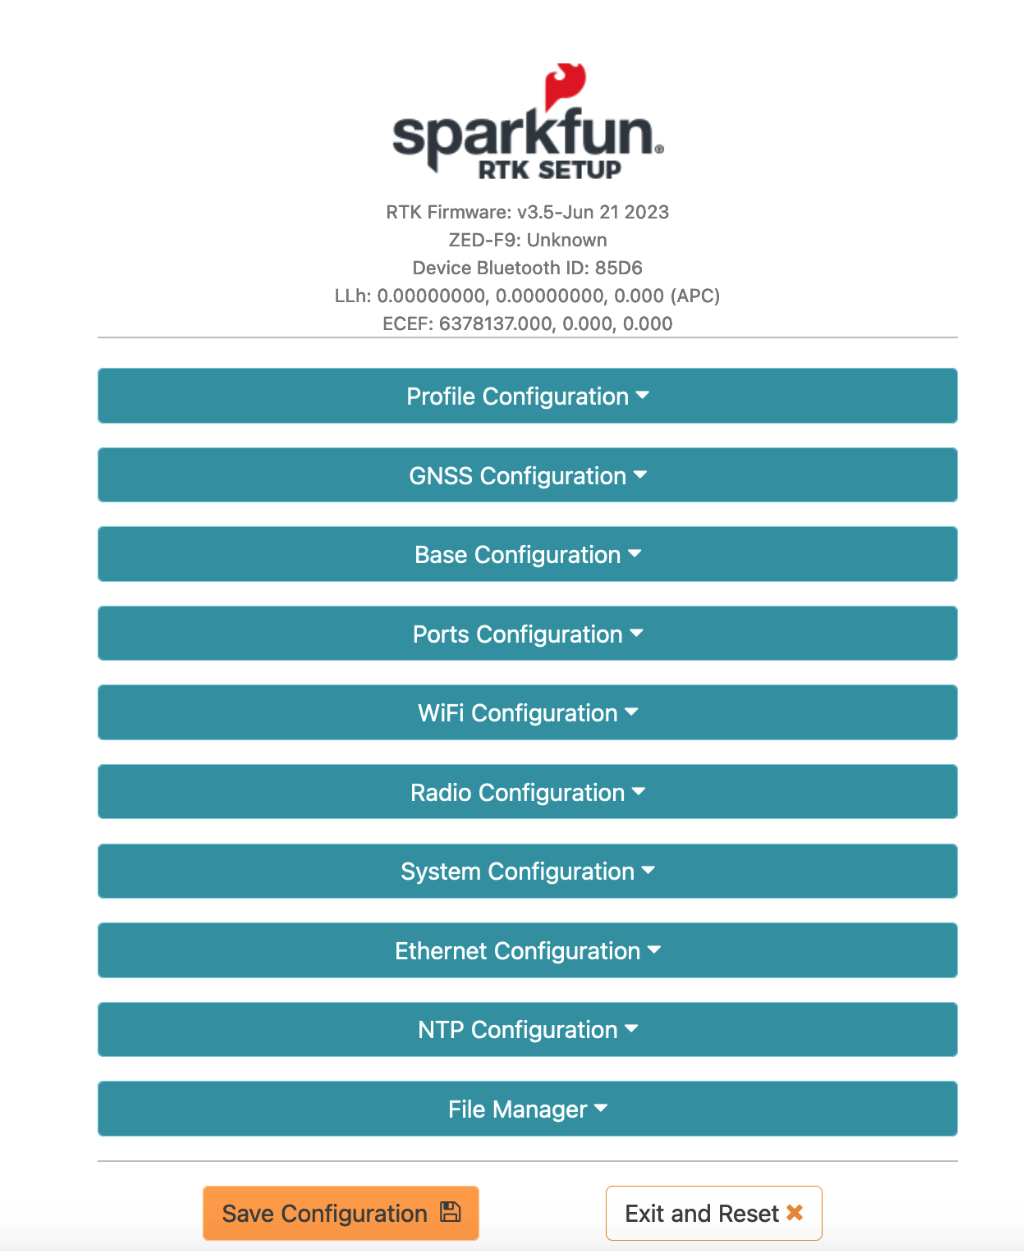 The SparkFun RTK Setup configure page displayed with dropdown menu rows showing different options for configuration.